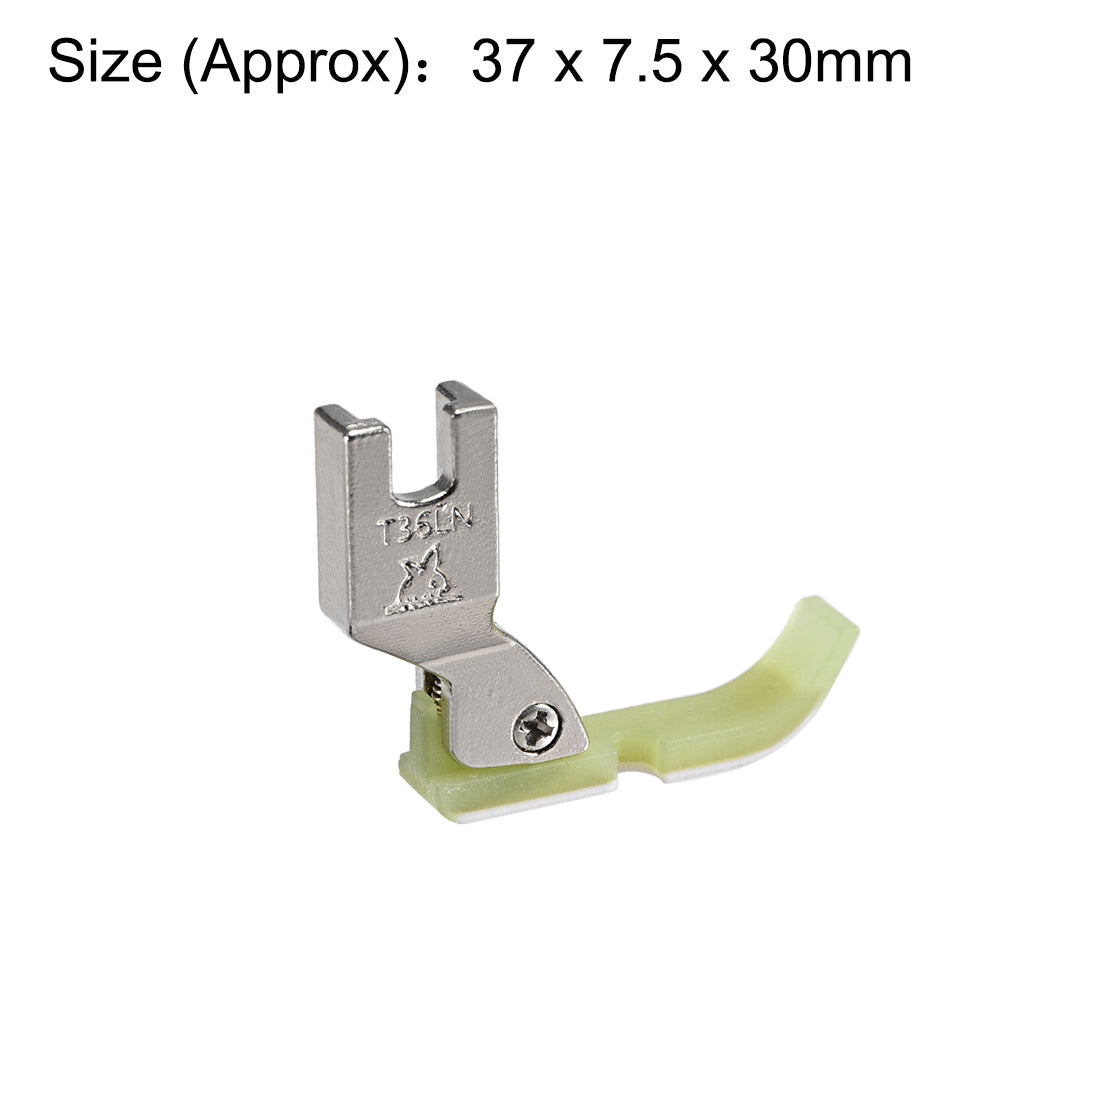 uxcell Uxcell #T36LN Narrow Zipper Foot with Plastic Bottom Suitable for Most of Industrial Sewing Machines